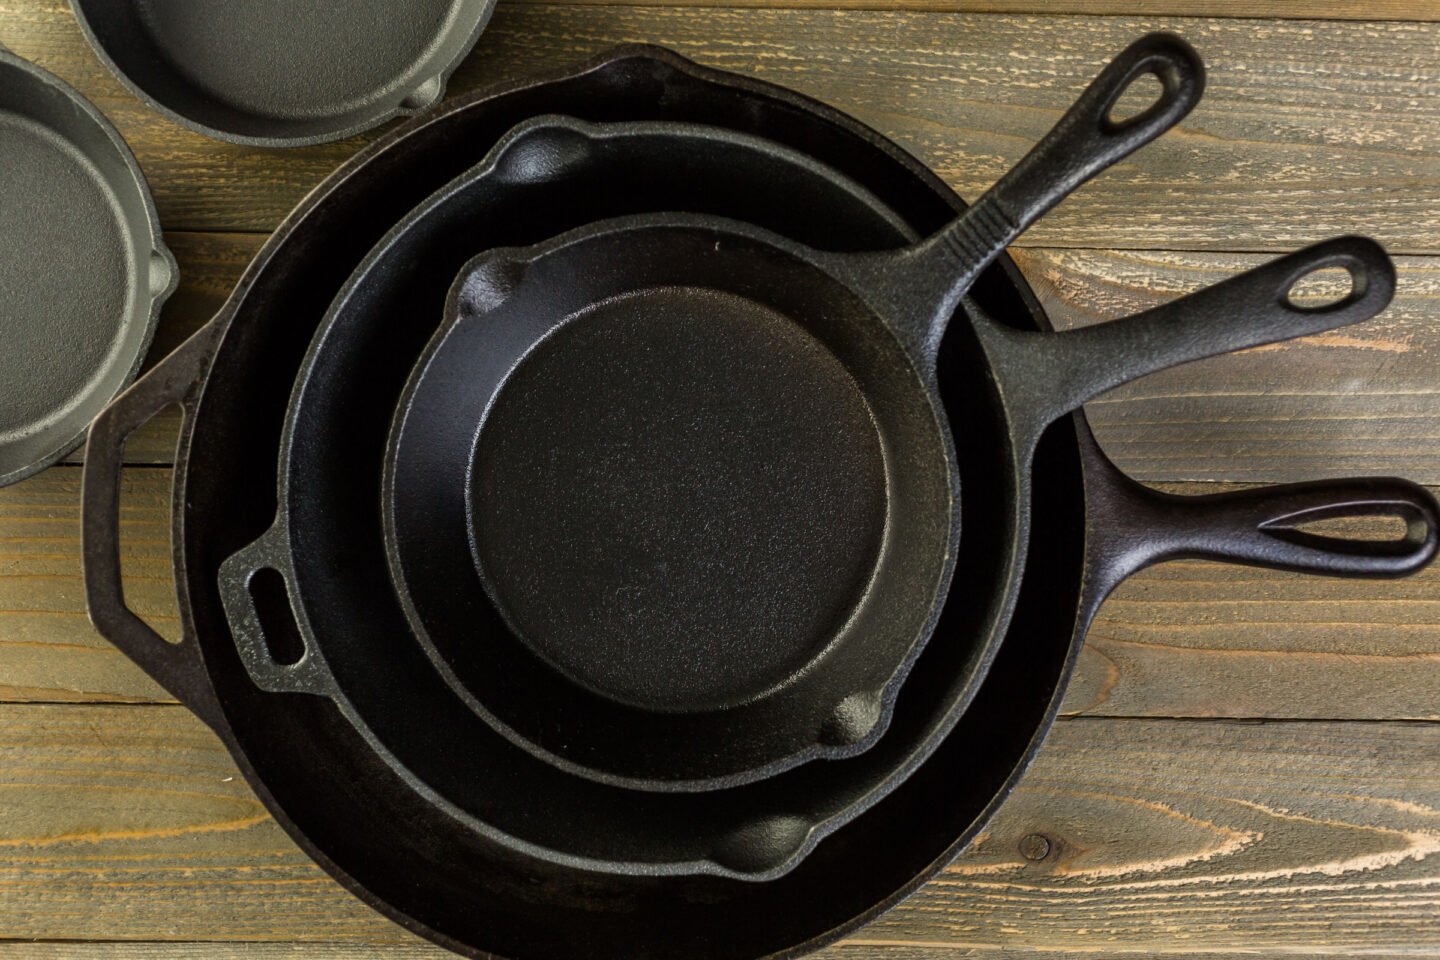 skillets of different sizes